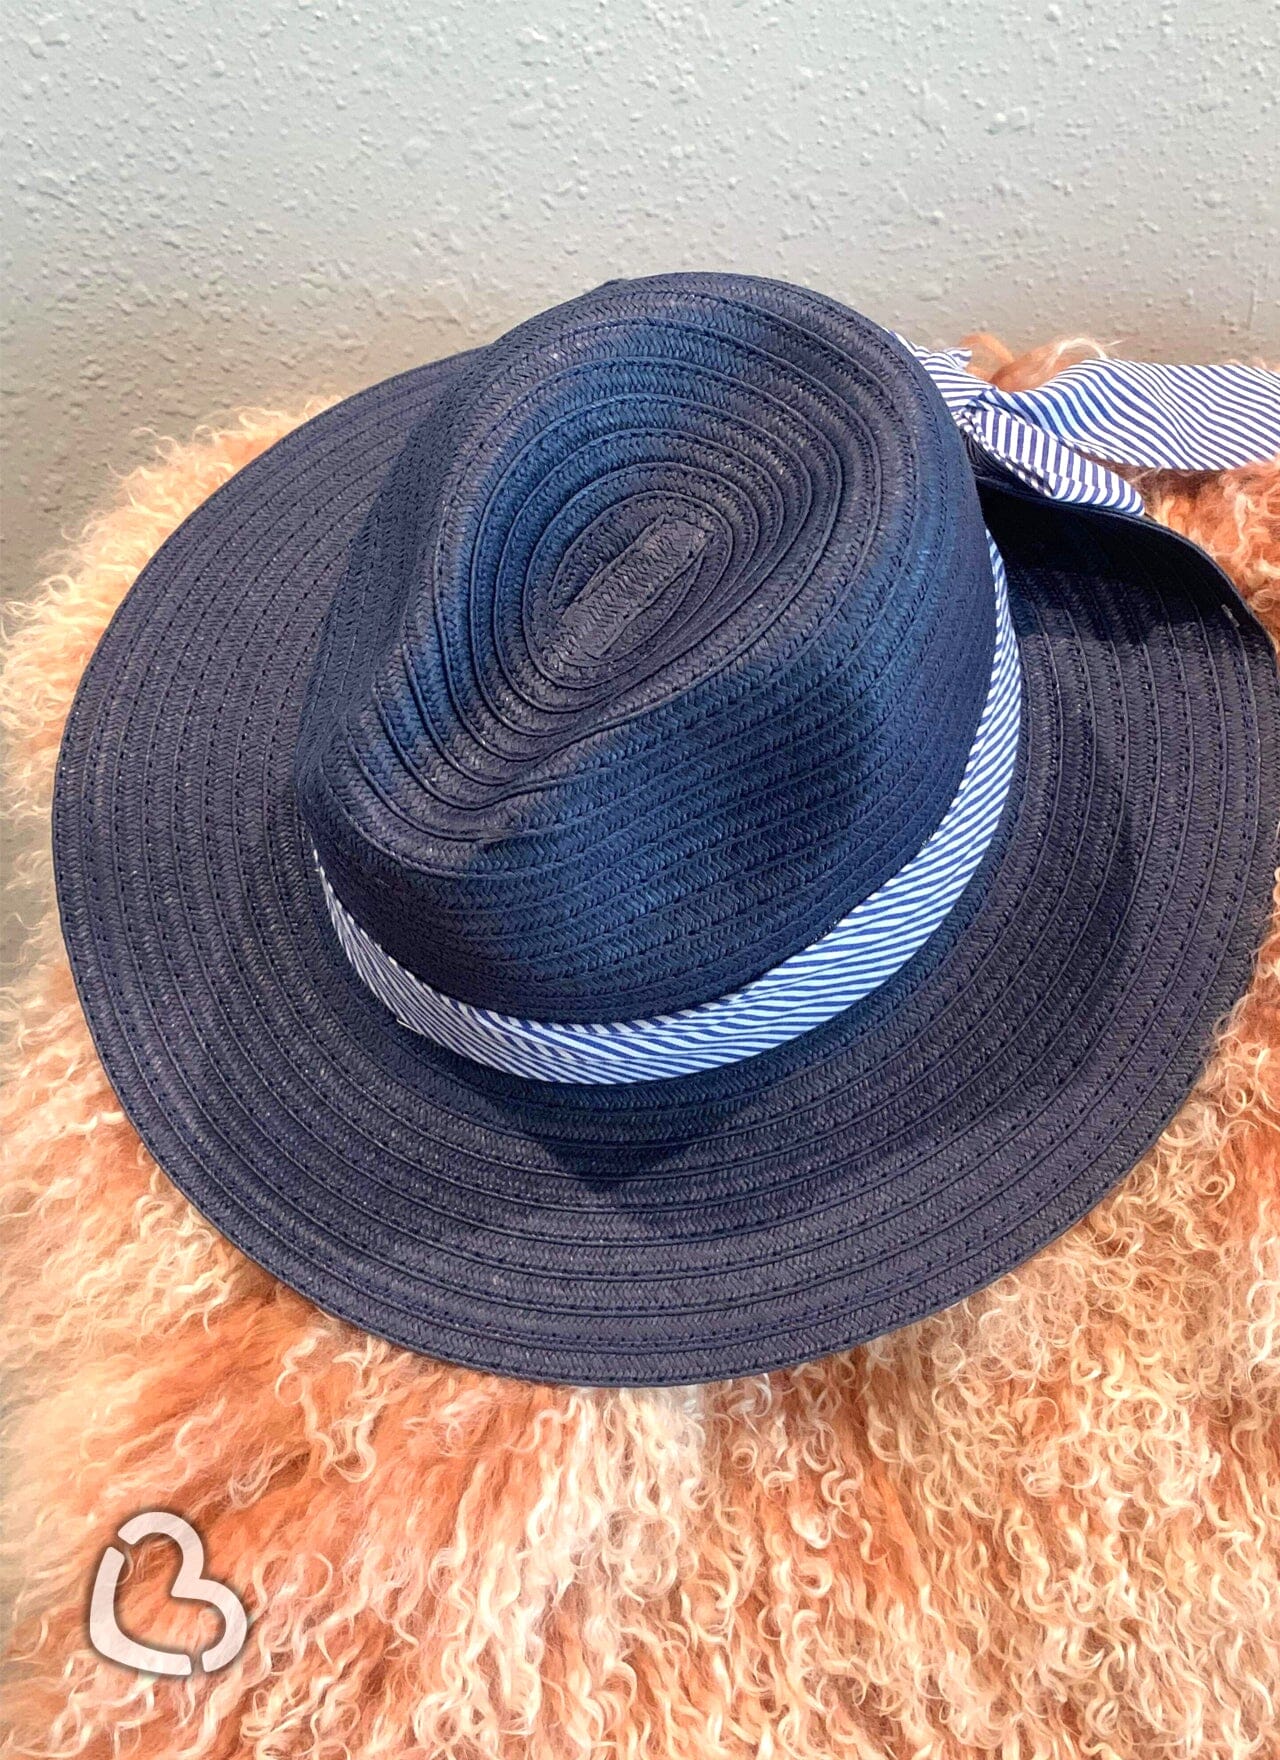 Striped Bow Navy with Navy Straw Hat Hat Cheekys Brand 